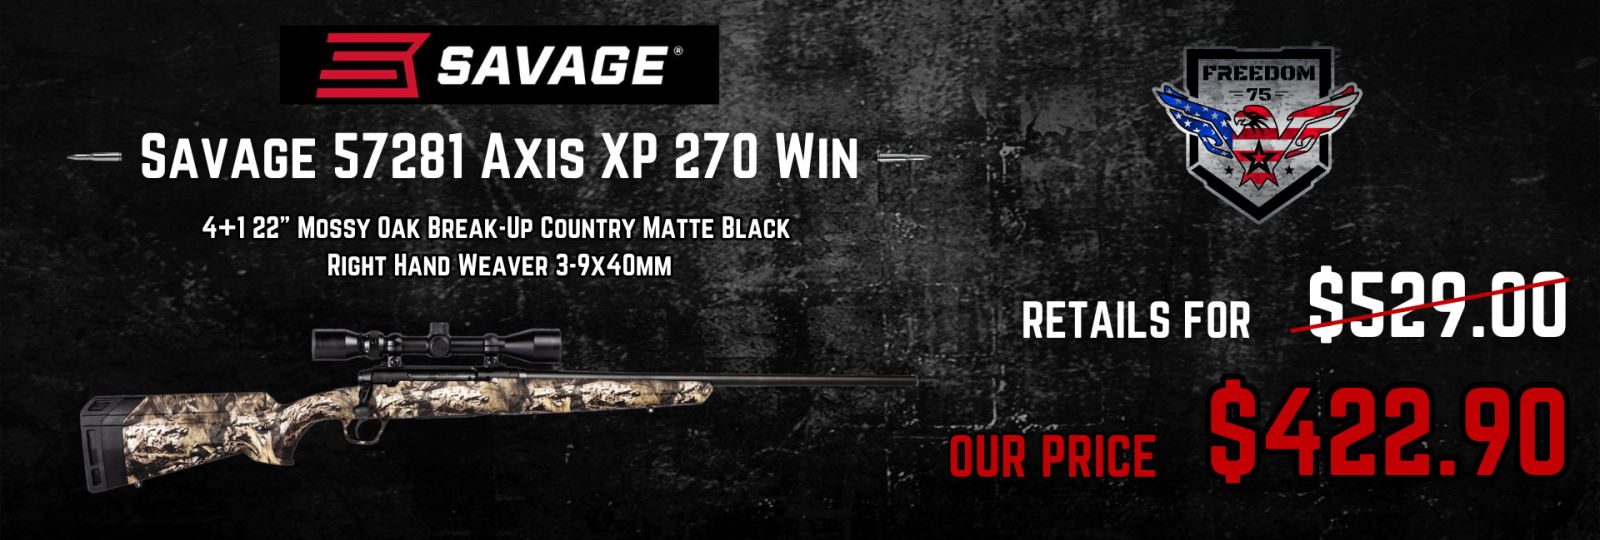 Savage 57281 Axis XP 270 Win 4+1 22" Mossy Oak Break-Up Country Matte Black Right Hand Weaver 3-9x40mm